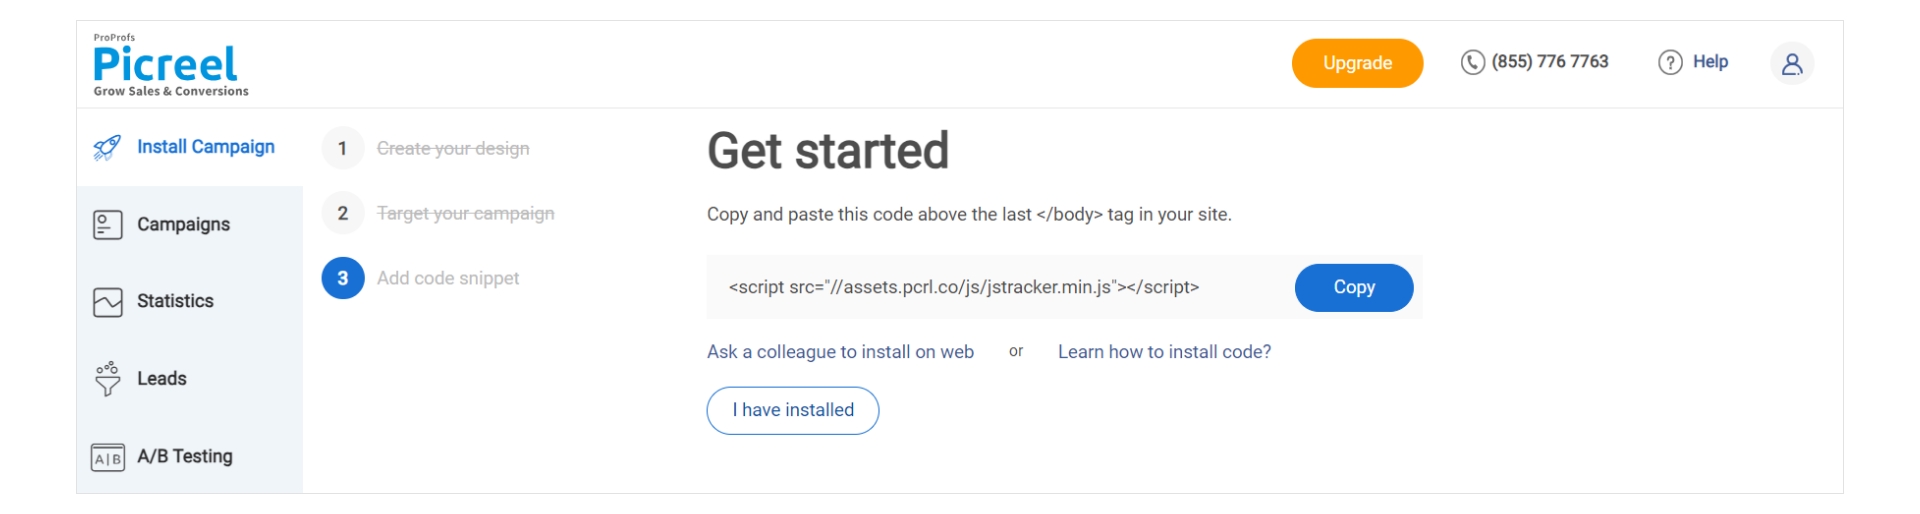 Step 5: Integrate with Your Website